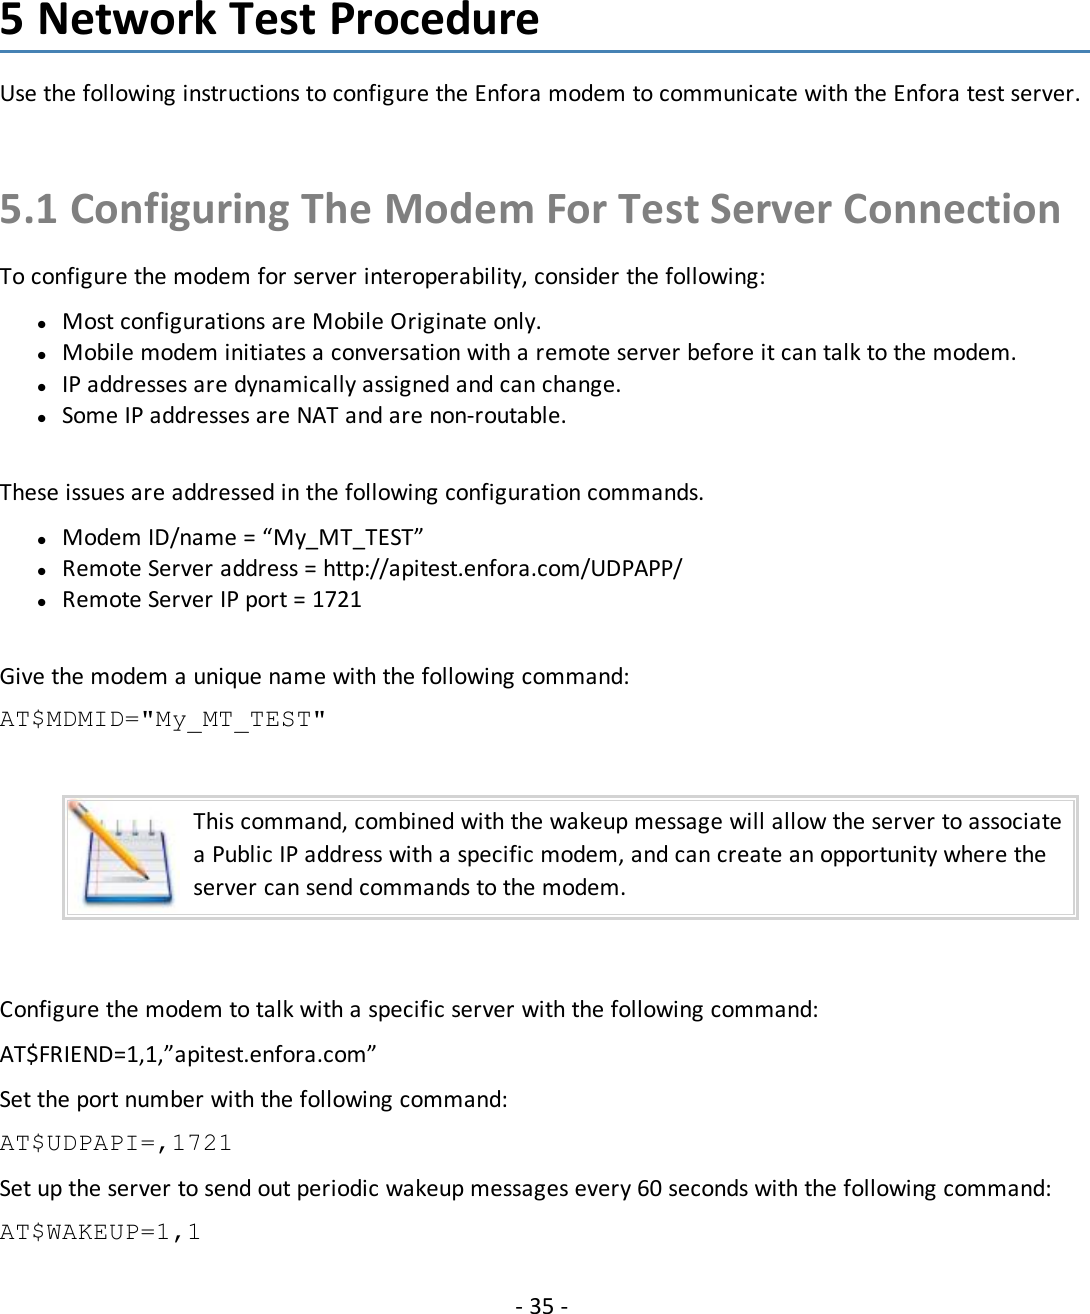 - 35 -5 Network Test ProcedureUse the following instructions to configure the Enfora modem to communicate with the Enfora test server.5.1 Configuring The Modem For Test Server ConnectionTo configure the modem for server interoperability, consider the following:lMost configurations are Mobile Originate only.lMobile modem initiates a conversation with a remote server before it can talk to the modem.lIP addresses are dynamically assigned and can change.lSome IP addresses are NAT and are non-routable.These issues are addressed in the following configuration commands.lModem ID/name = “My_MT_TEST”lRemote Server address = http://apitest.enfora.com/UDPAPP/lRemote Server IP port = 1721Give the modem a unique name with the following command:AT$MDMID=&quot;My_MT_TEST&quot;This command, combined with the wakeup message will allow the server to associatea Public IP address with a specific modem, and can create an opportunity where theserver can send commands to the modem.Configure the modem to talk with a specific server with the following command:AT$FRIEND=1,1,”apitest.enfora.com”Set the port number with the following command:AT$UDPAPI=,1721Set up the server to send out periodic wakeup messages every 60 seconds with the following command:AT$WAKEUP=1,1